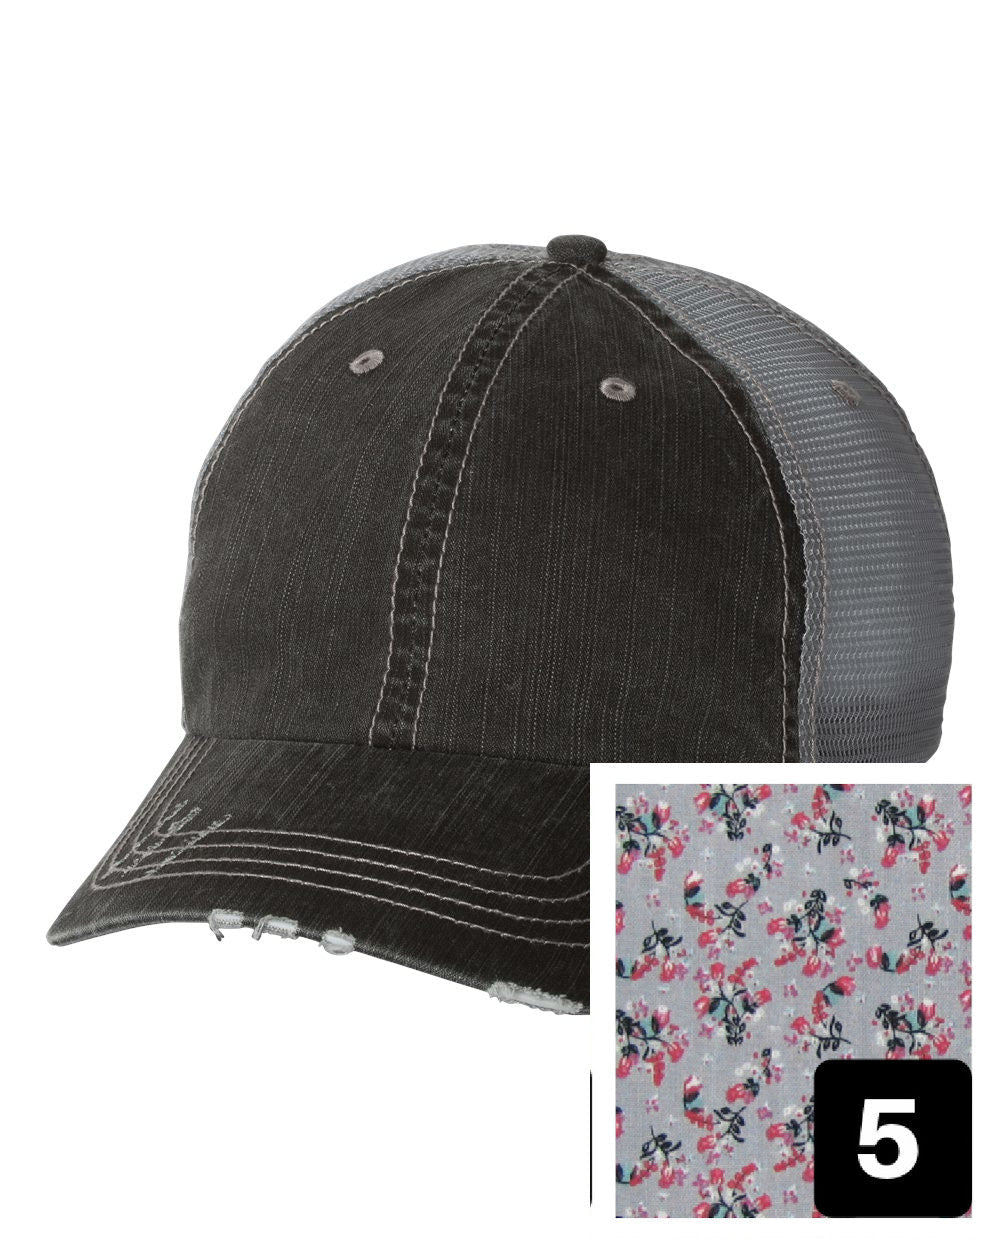 gray distressed trucker hat with purple and pink floral fabric state of Tennessee